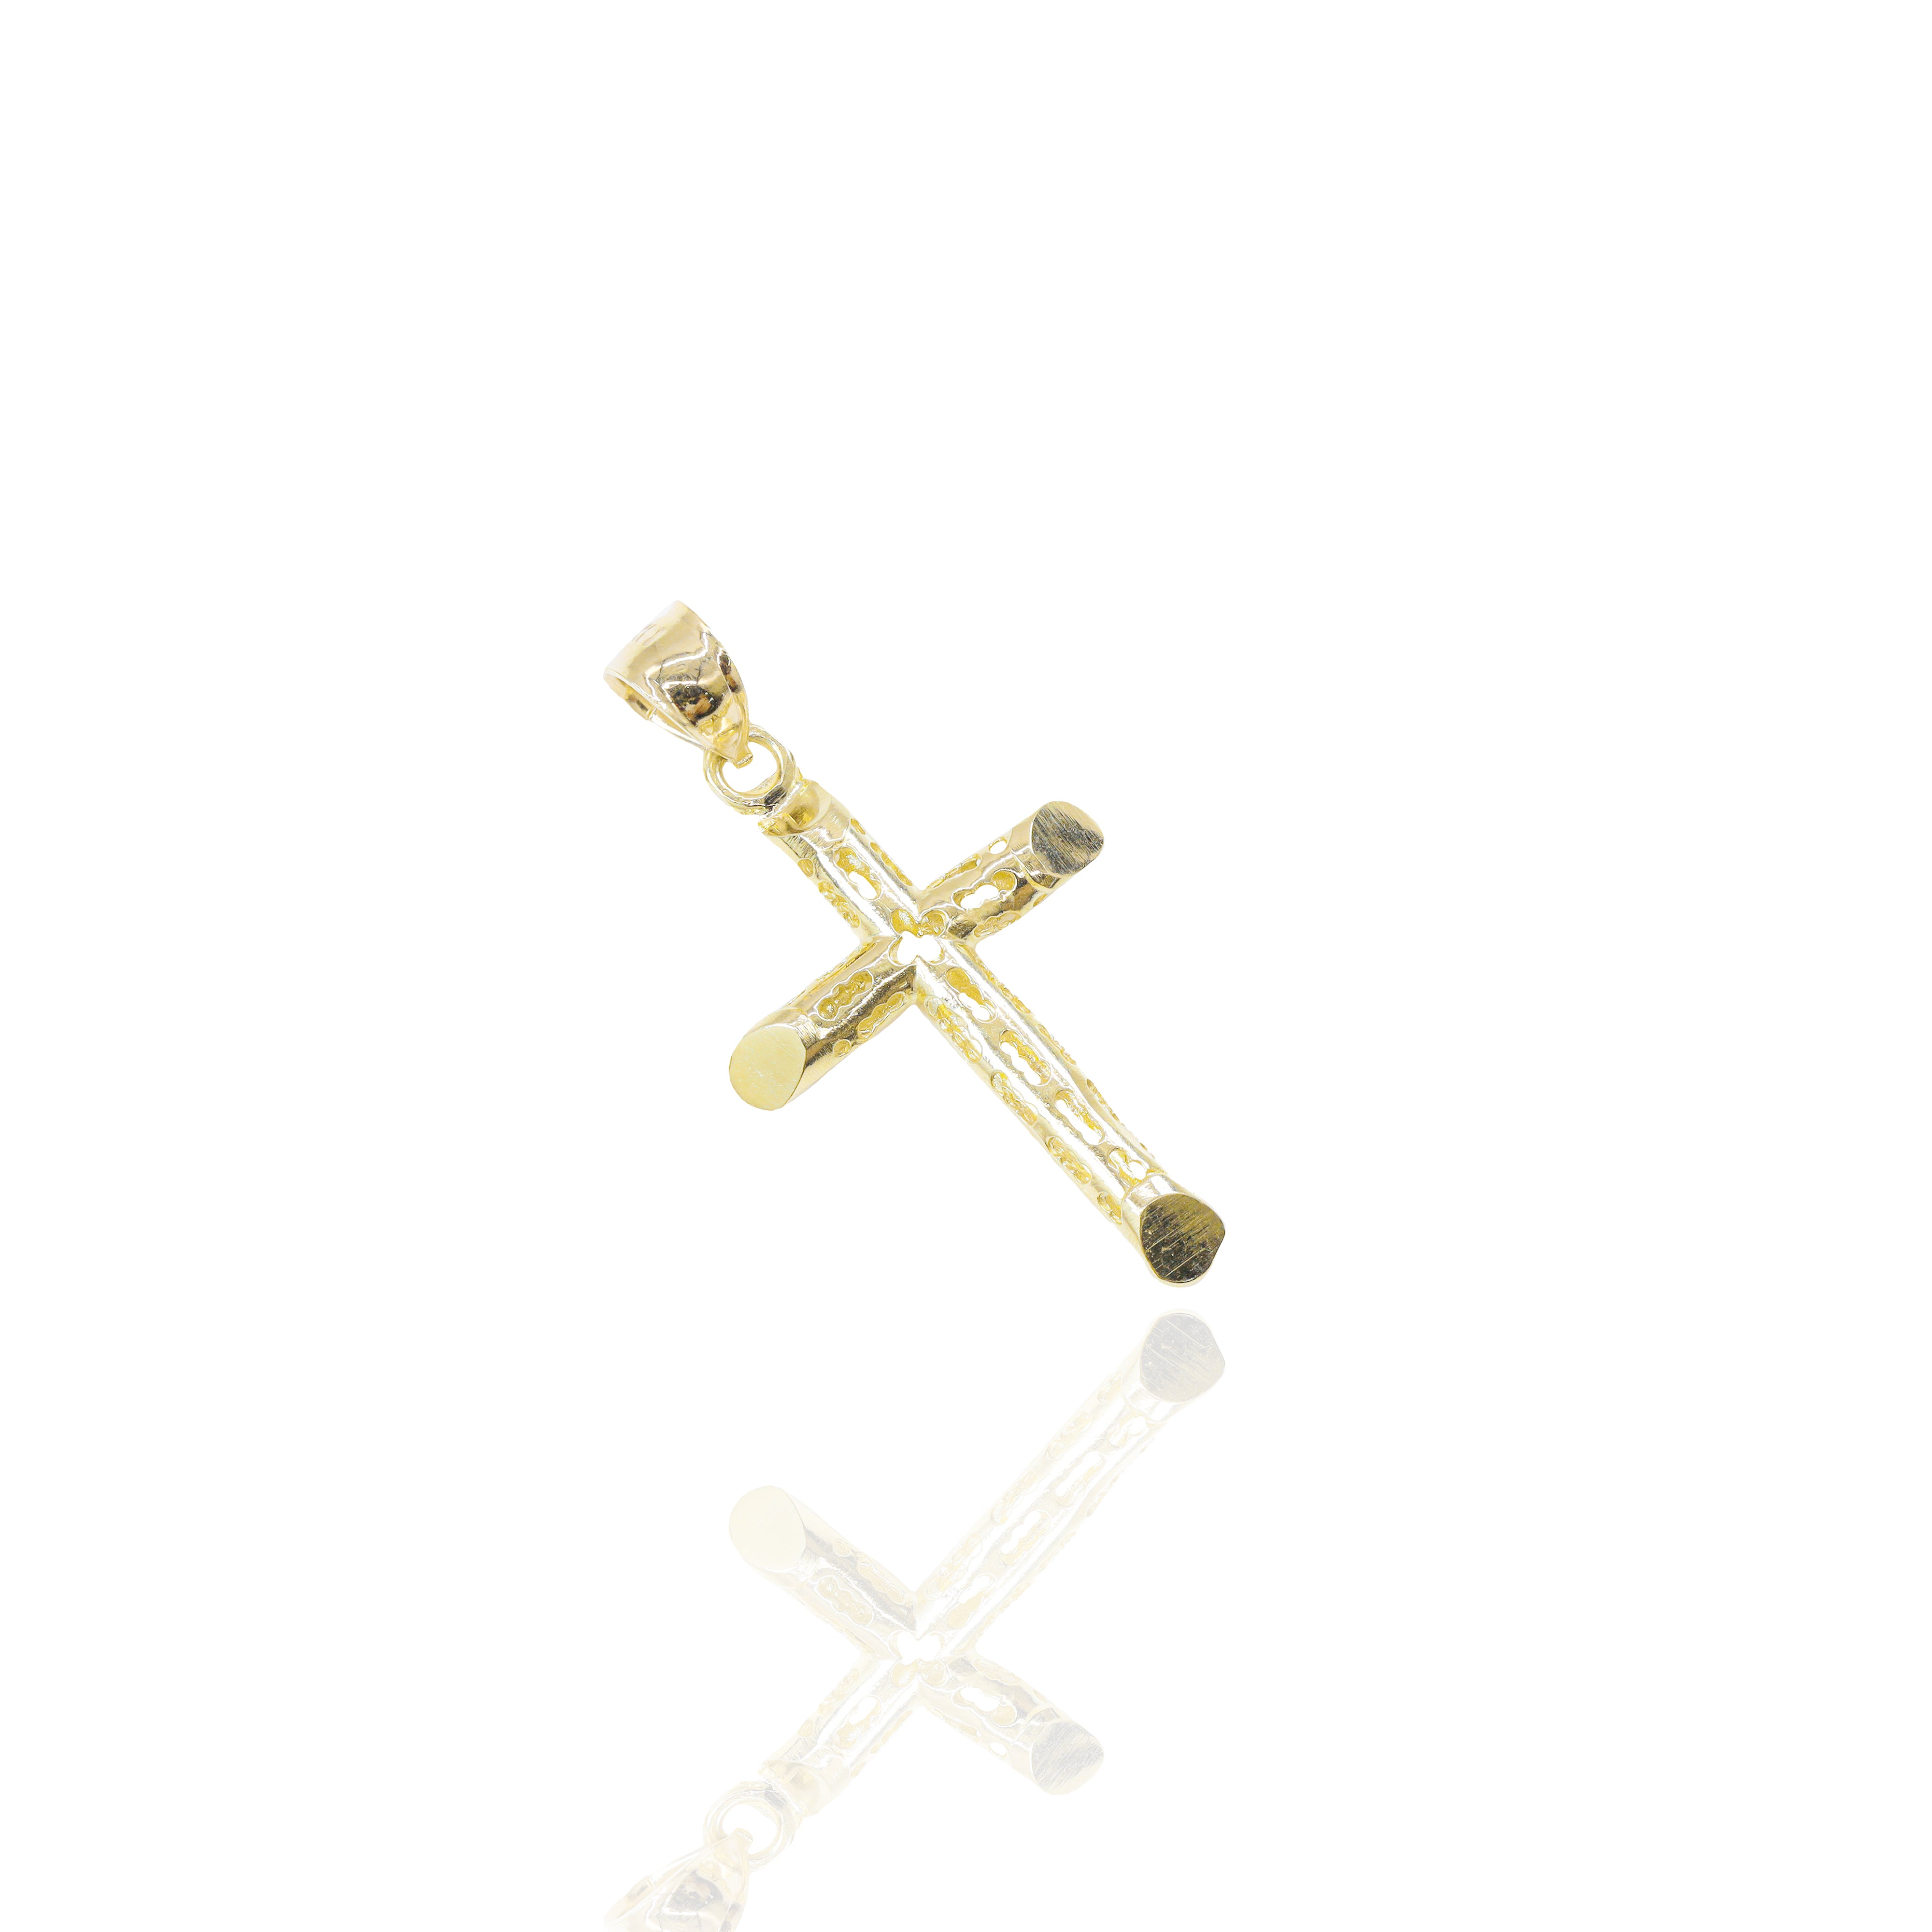 Italian Gold Cross Pendant with Opening (Extra-Small)